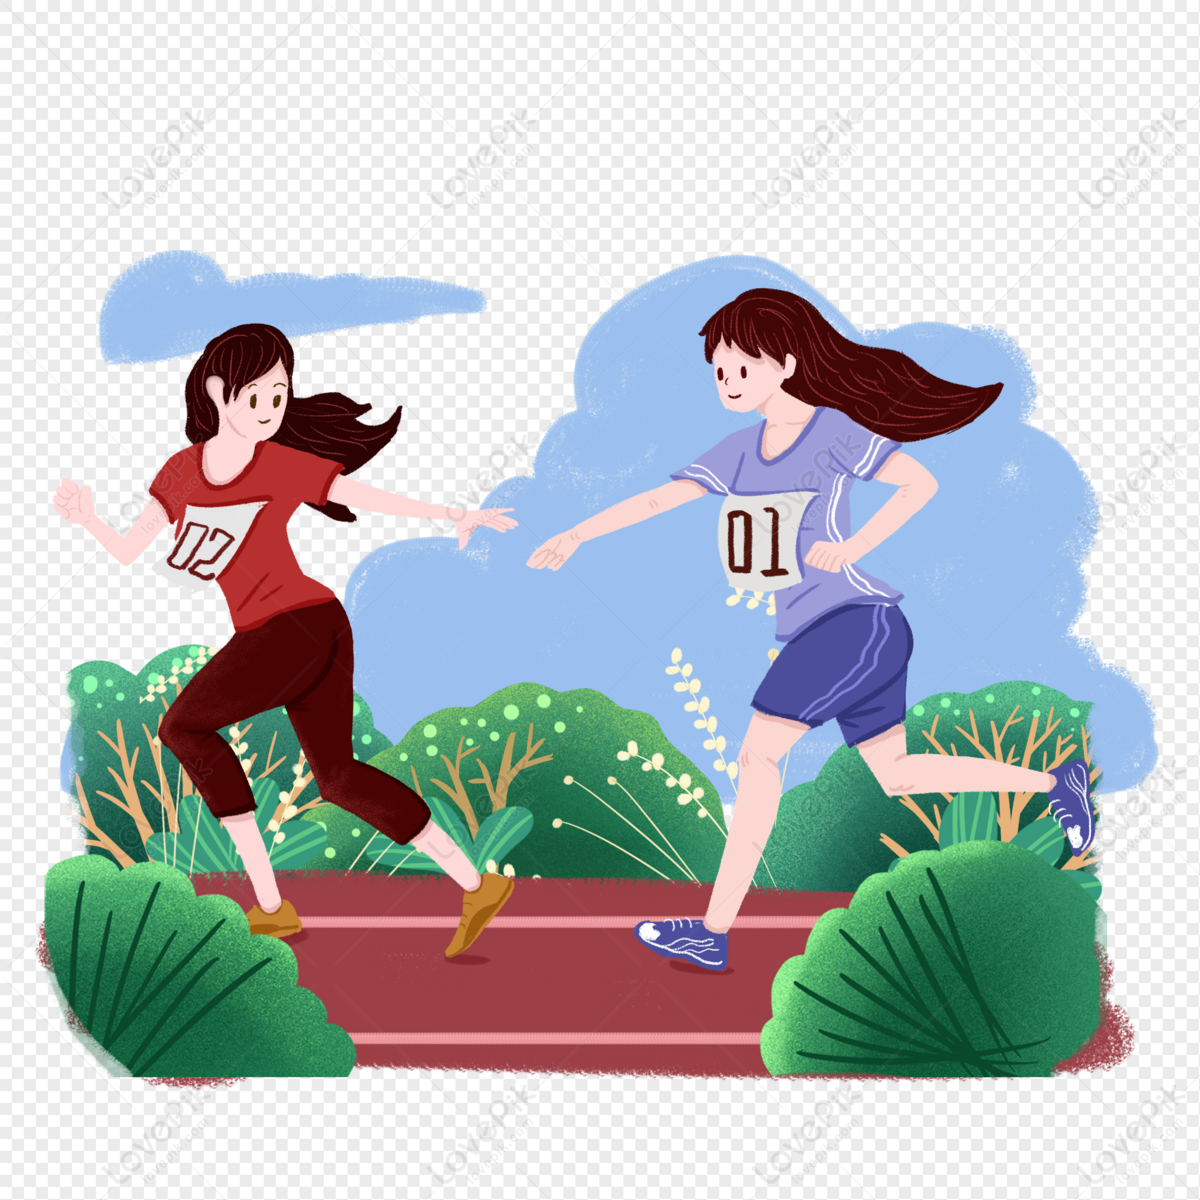 Relay Racing Illustration PNG Free Download And Clipart Image For Free  Download - Lovepik | 401368783